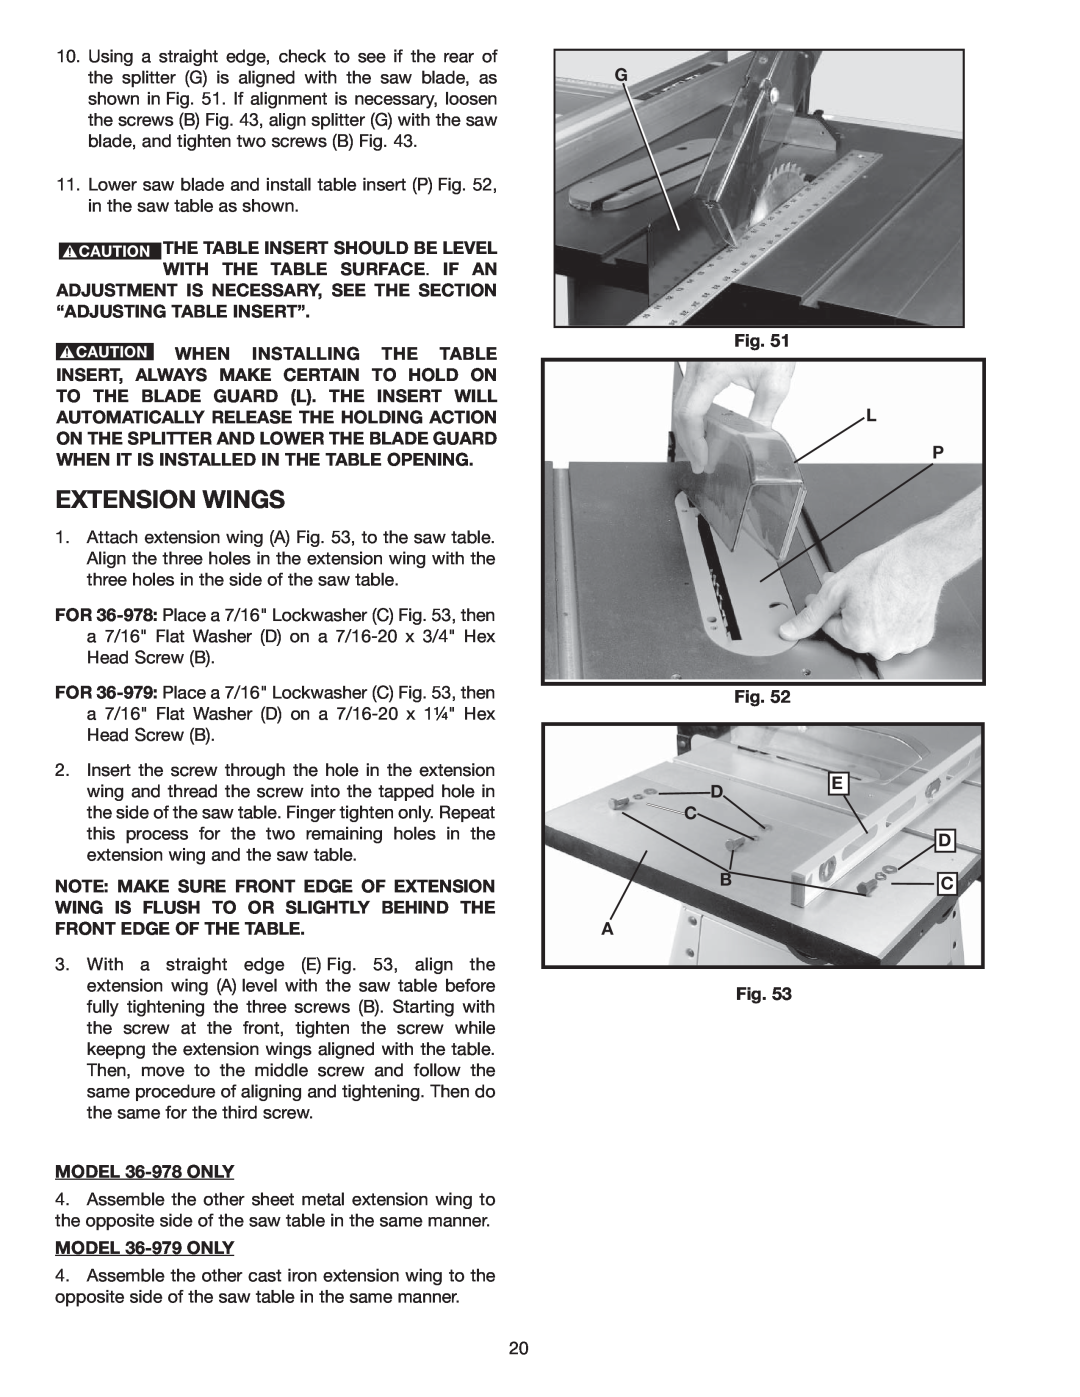 Delta 36-978 instruction manual Extension Wings 